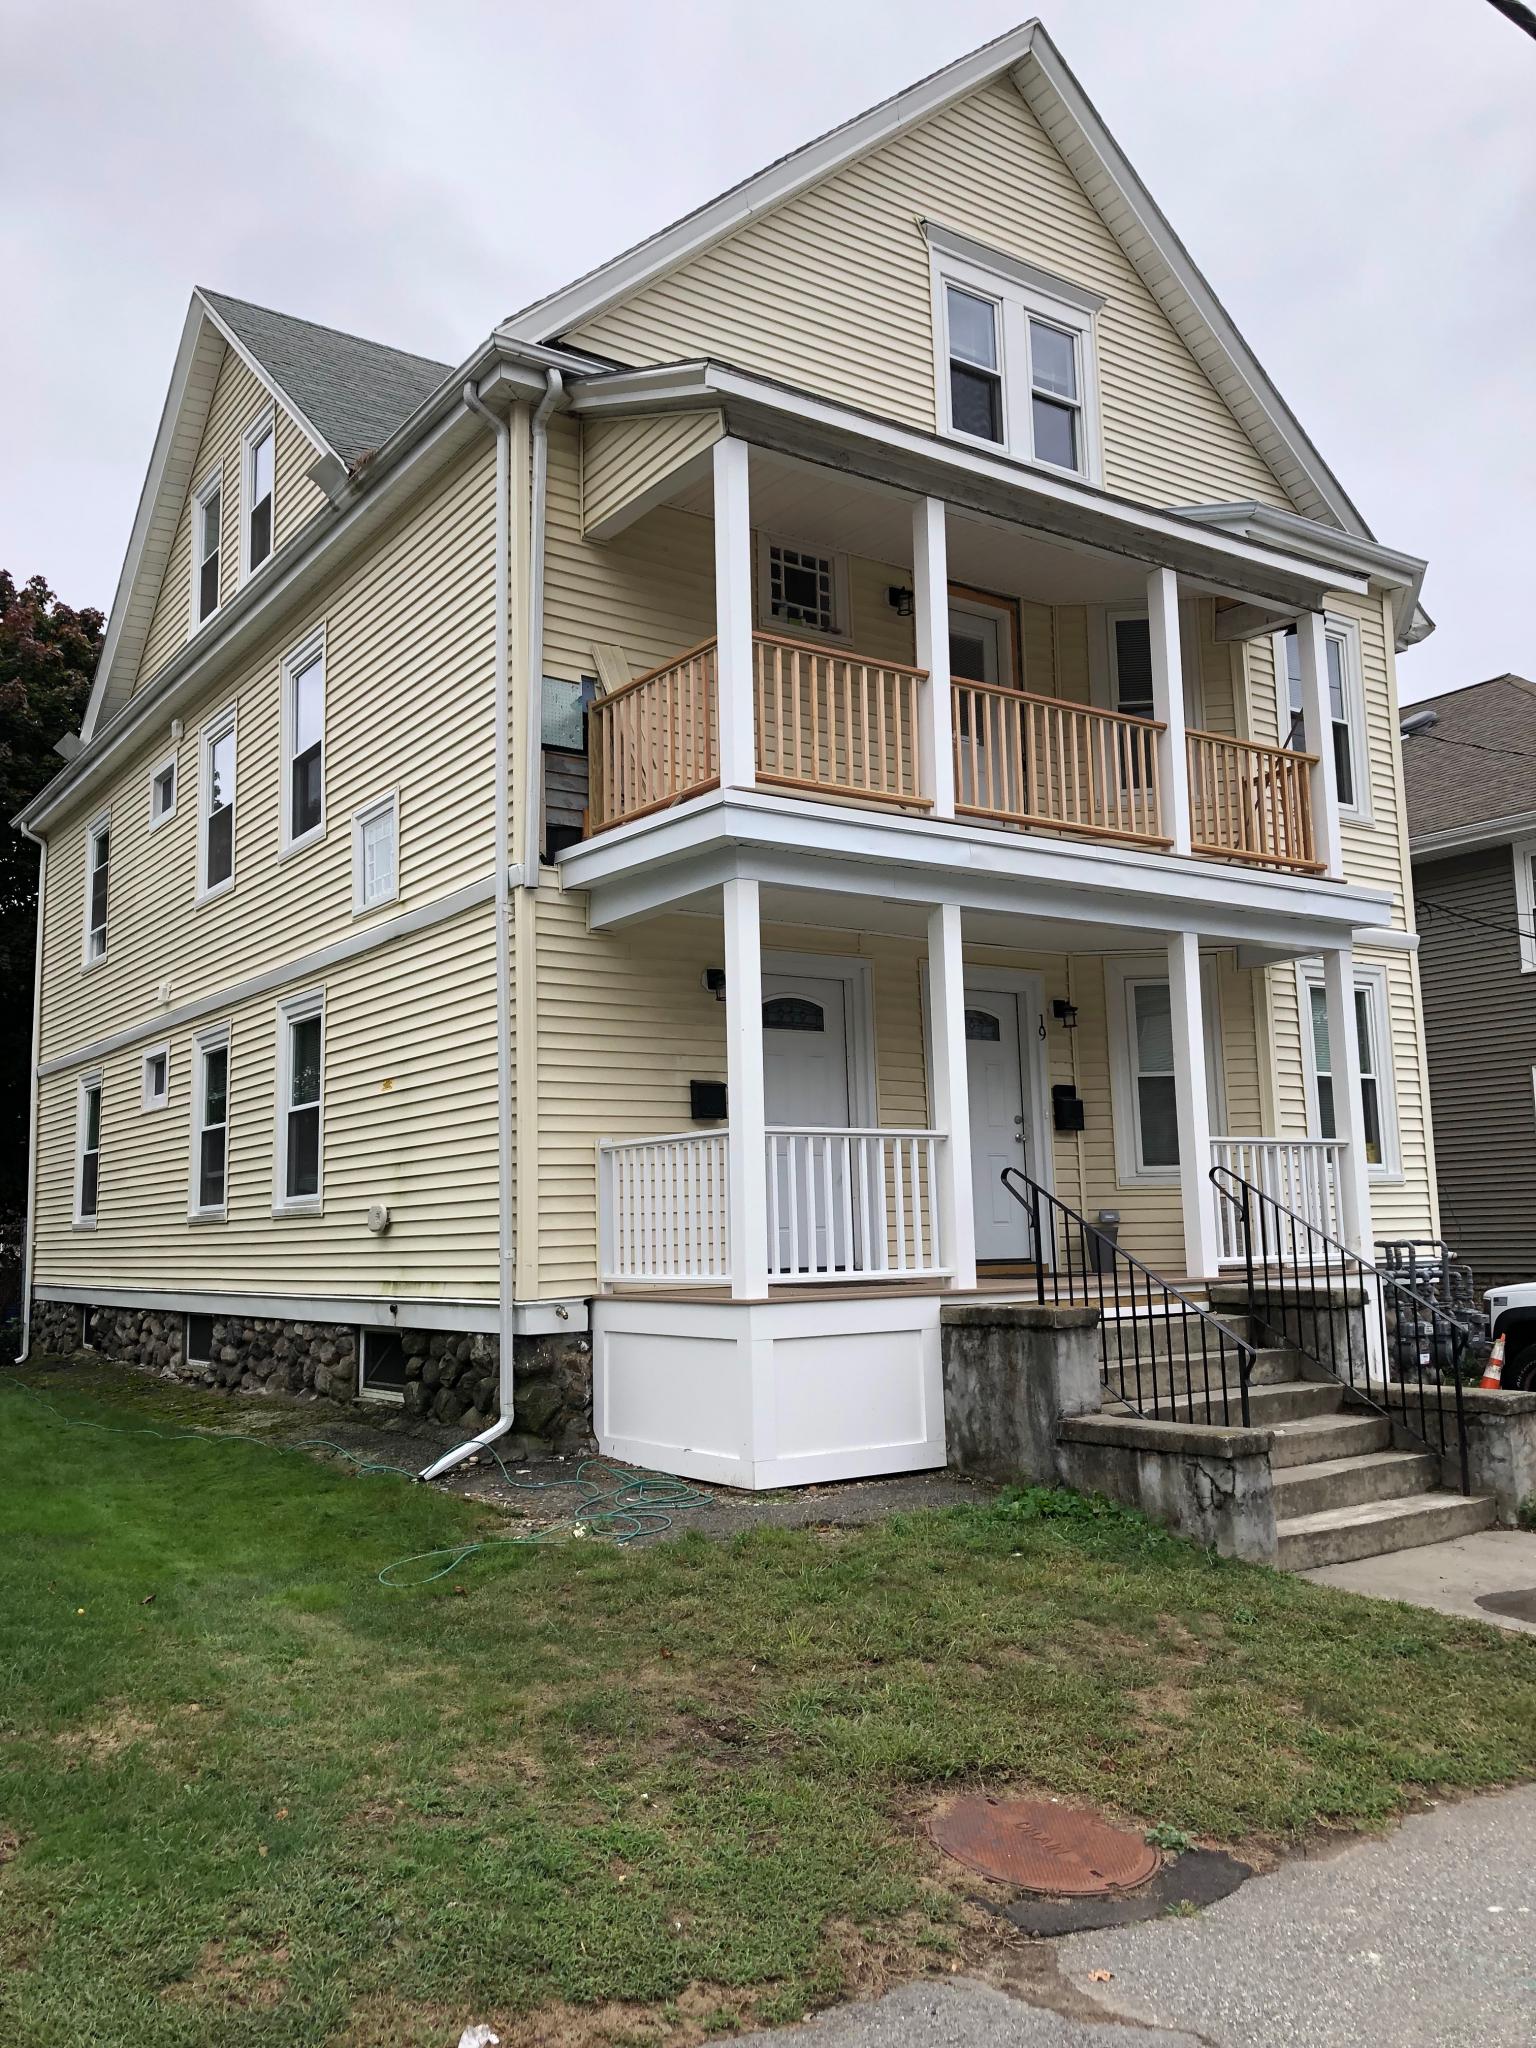 Photos of apartment on Banks St.,Waltham MA 02451